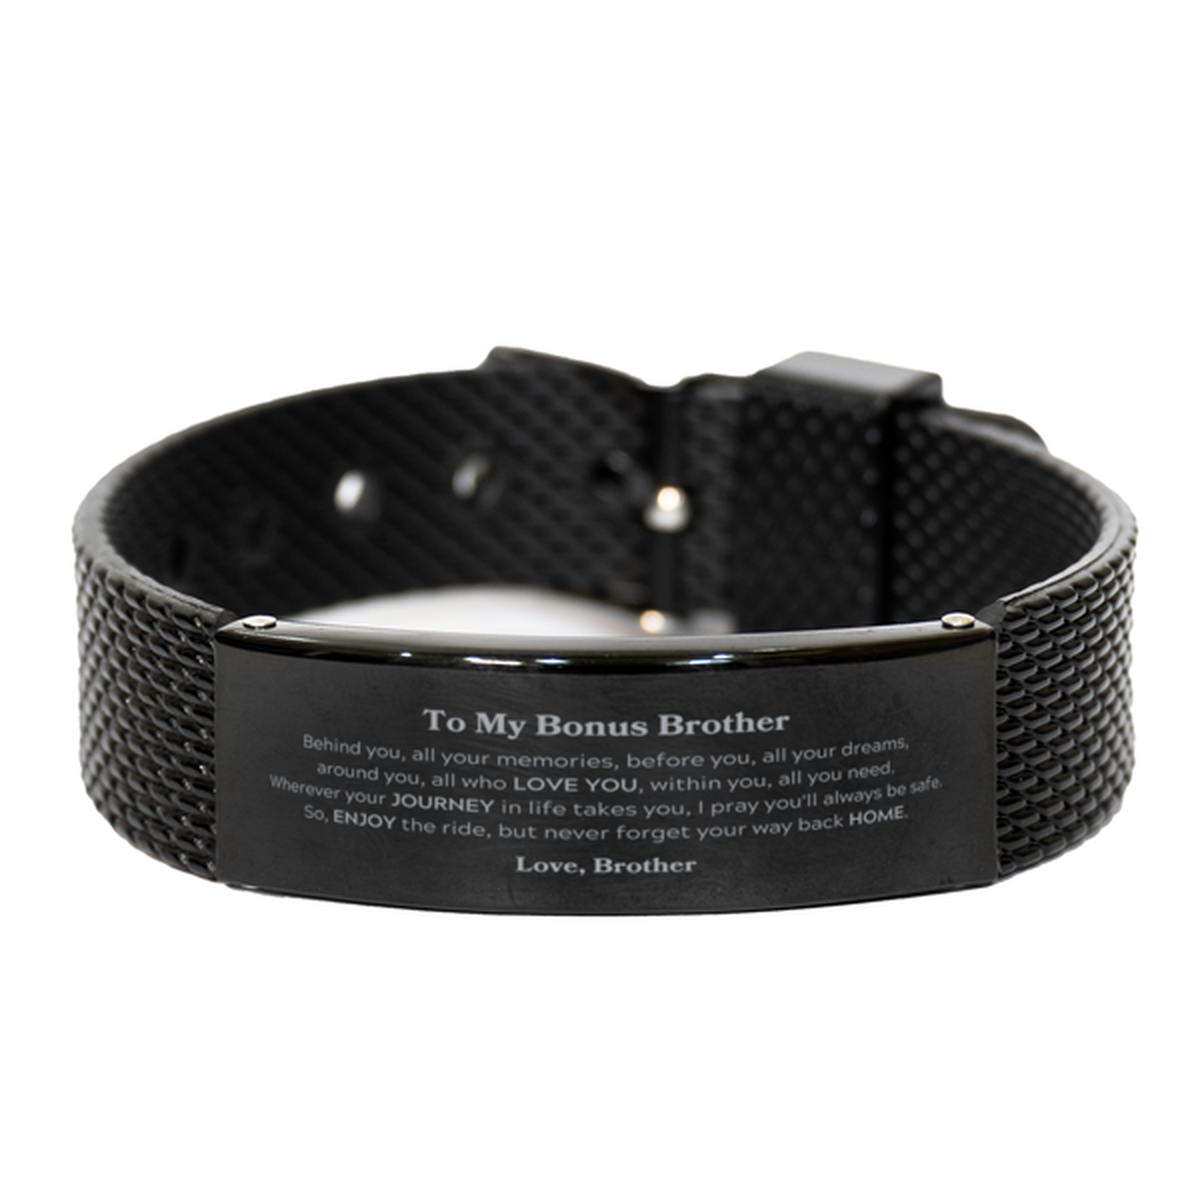 To My Bonus Brother Graduation Gifts from Brother, Bonus Brother Black Shark Mesh Bracelet Christmas Birthday Gifts for Bonus Brother Behind you, all your memories, before you, all your dreams. Love, Brother